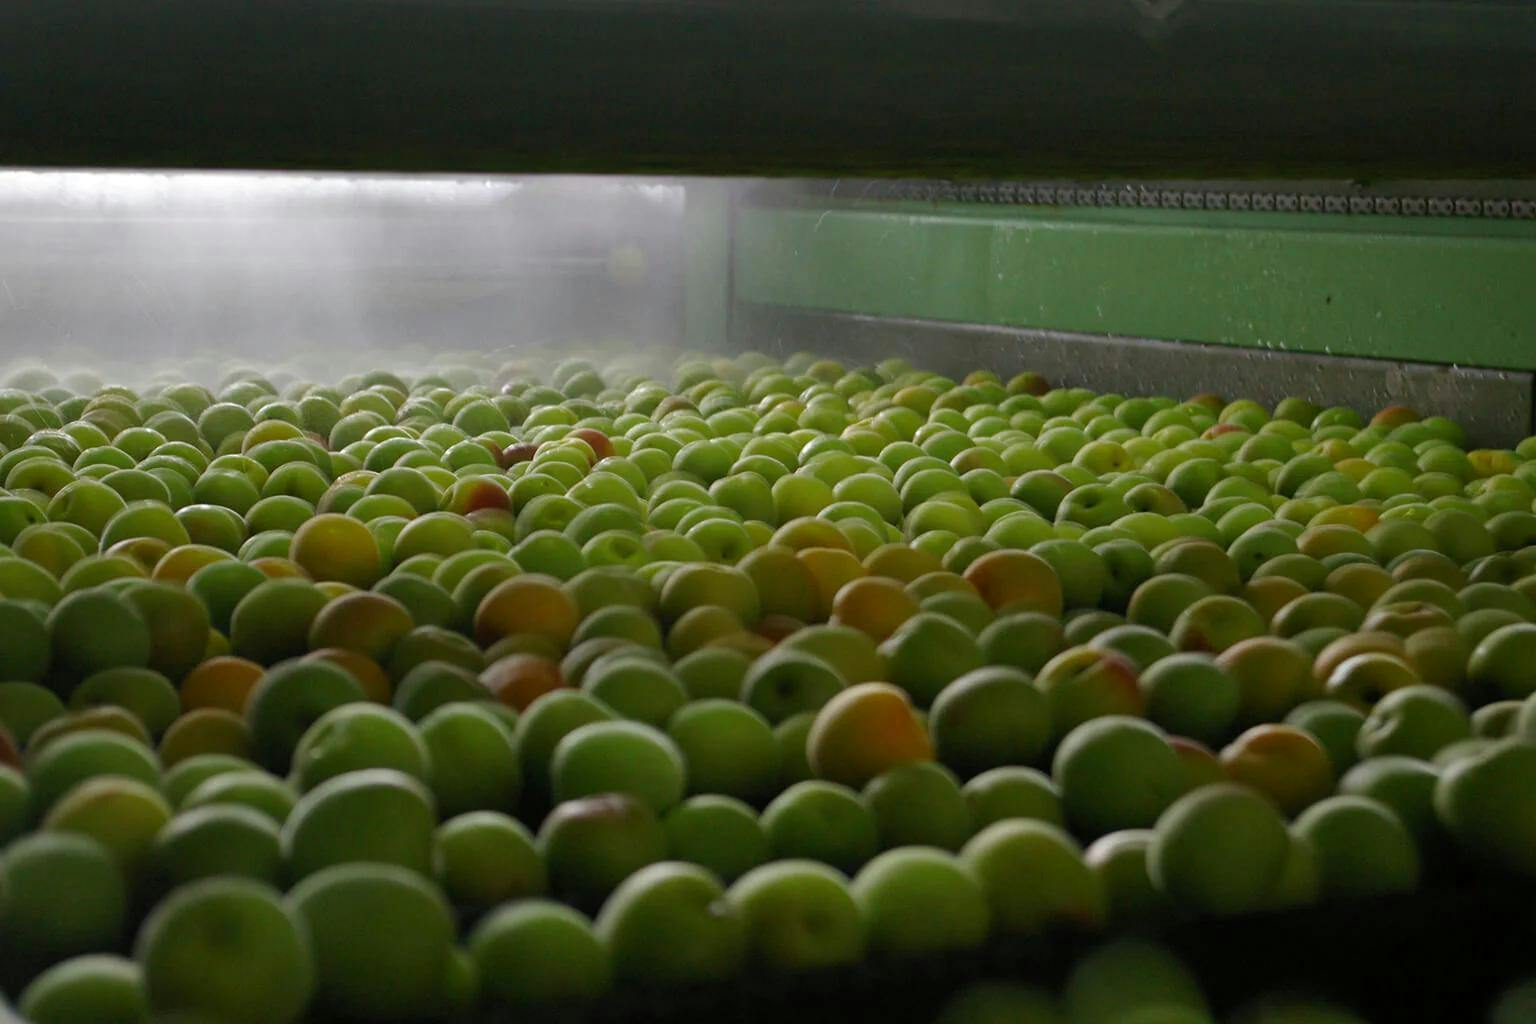 Ripe ume fruit are washed at Choya Umeshu’s brewery before being used in their products.